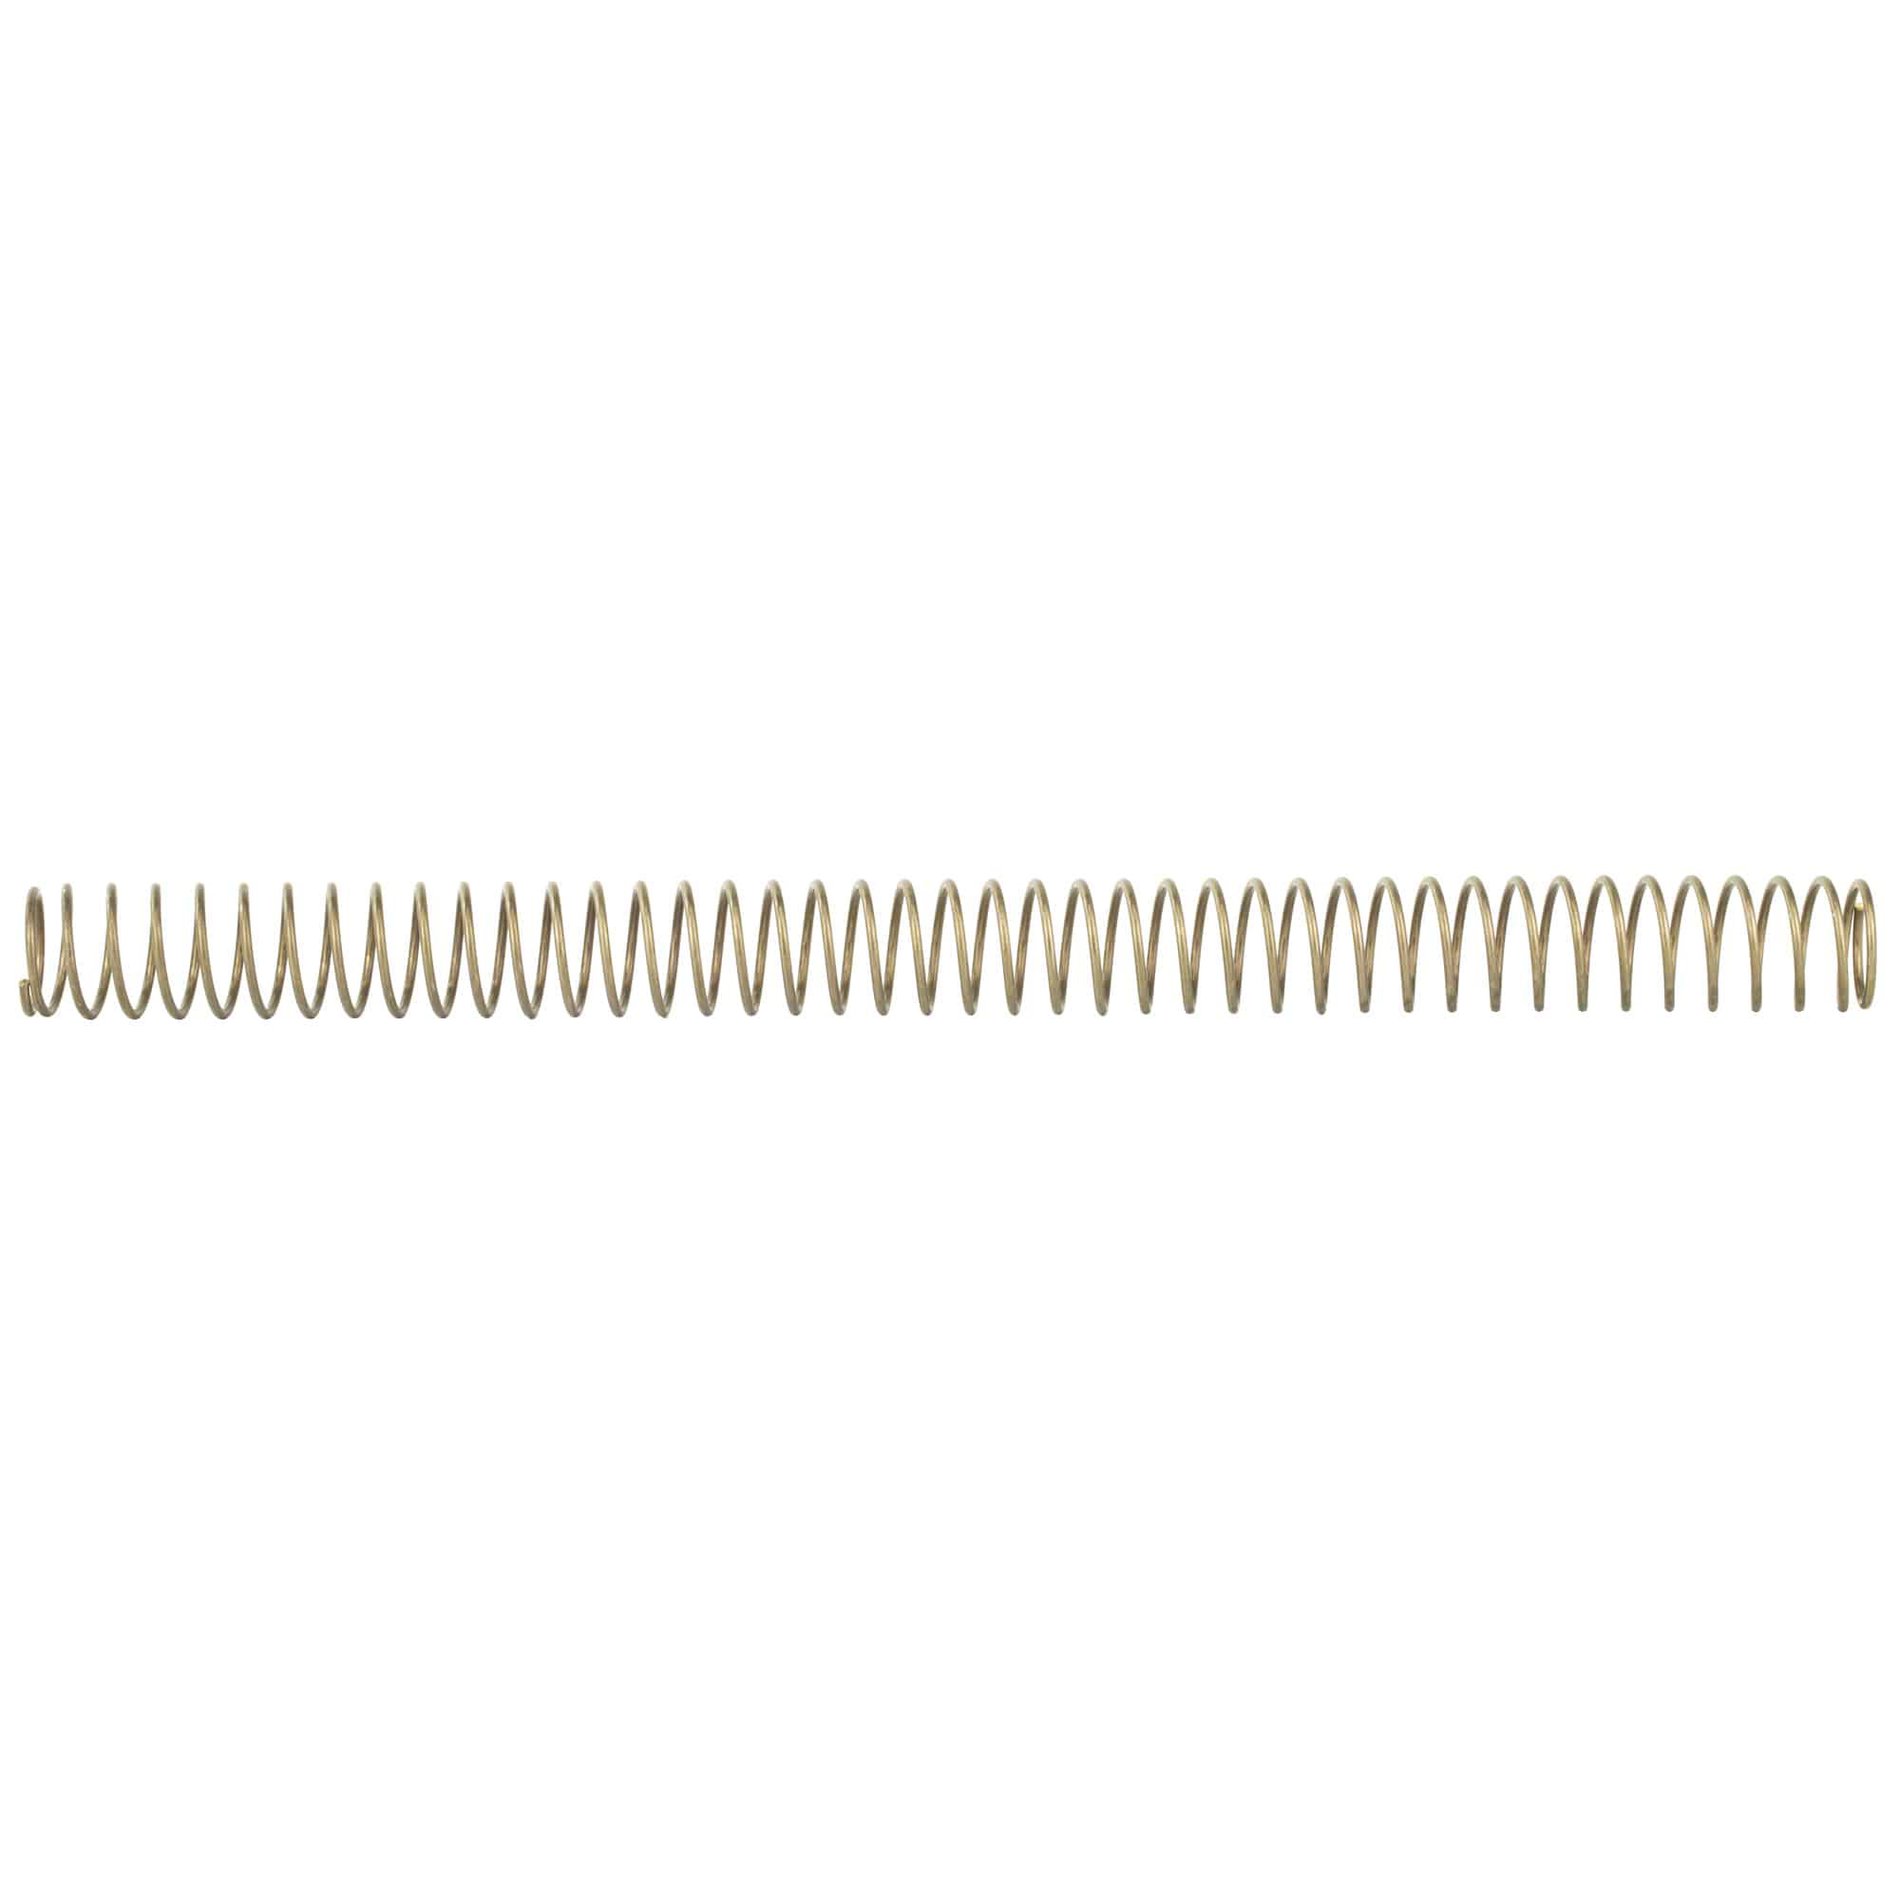 Luth-AR Rifle Buffer Spring A1 A2 AR-15 Receiver Extensions. 